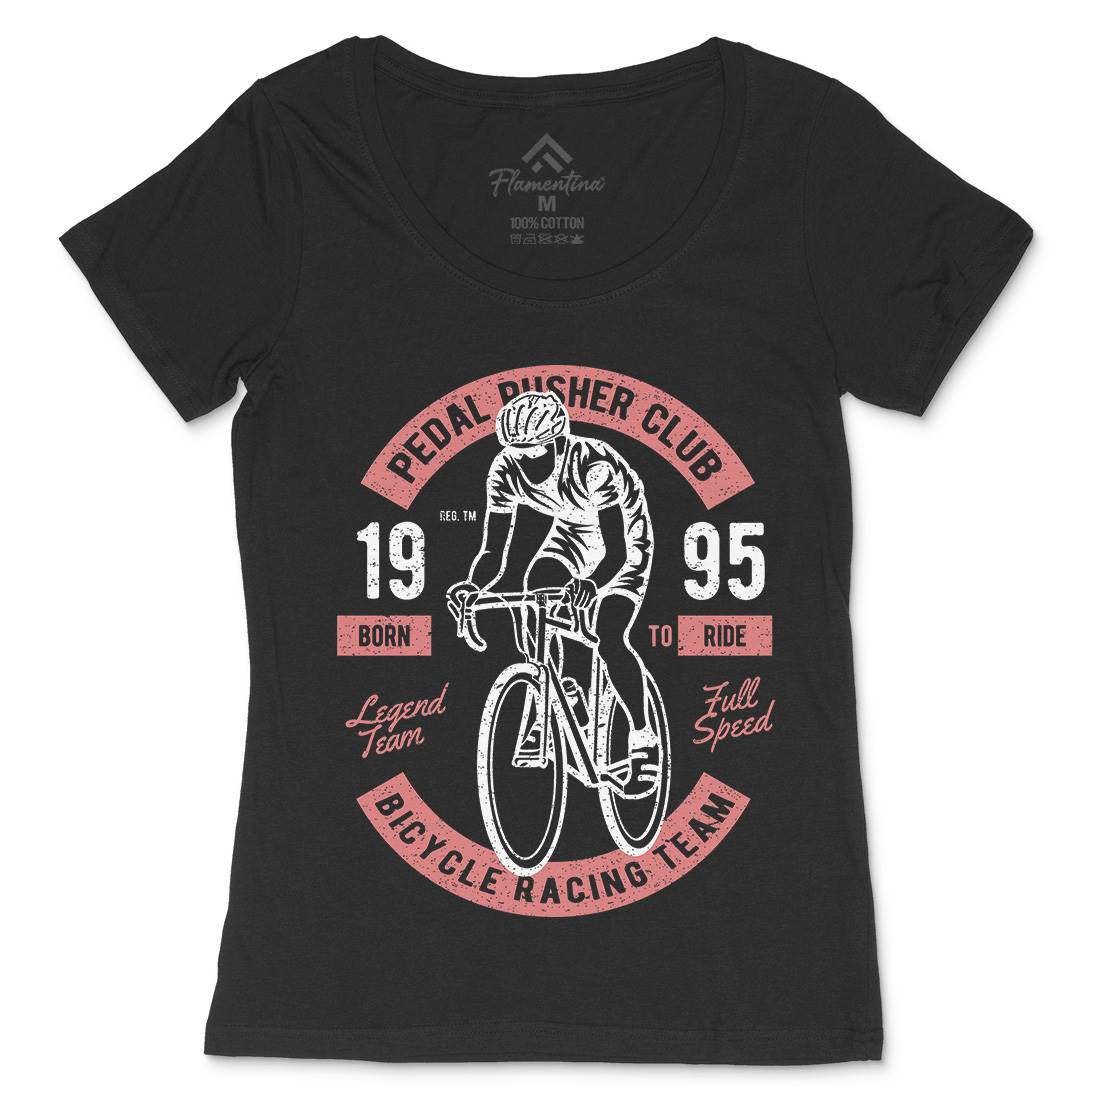 Bicycle Racing Team Womens Scoop Neck T-Shirt Bikes A011